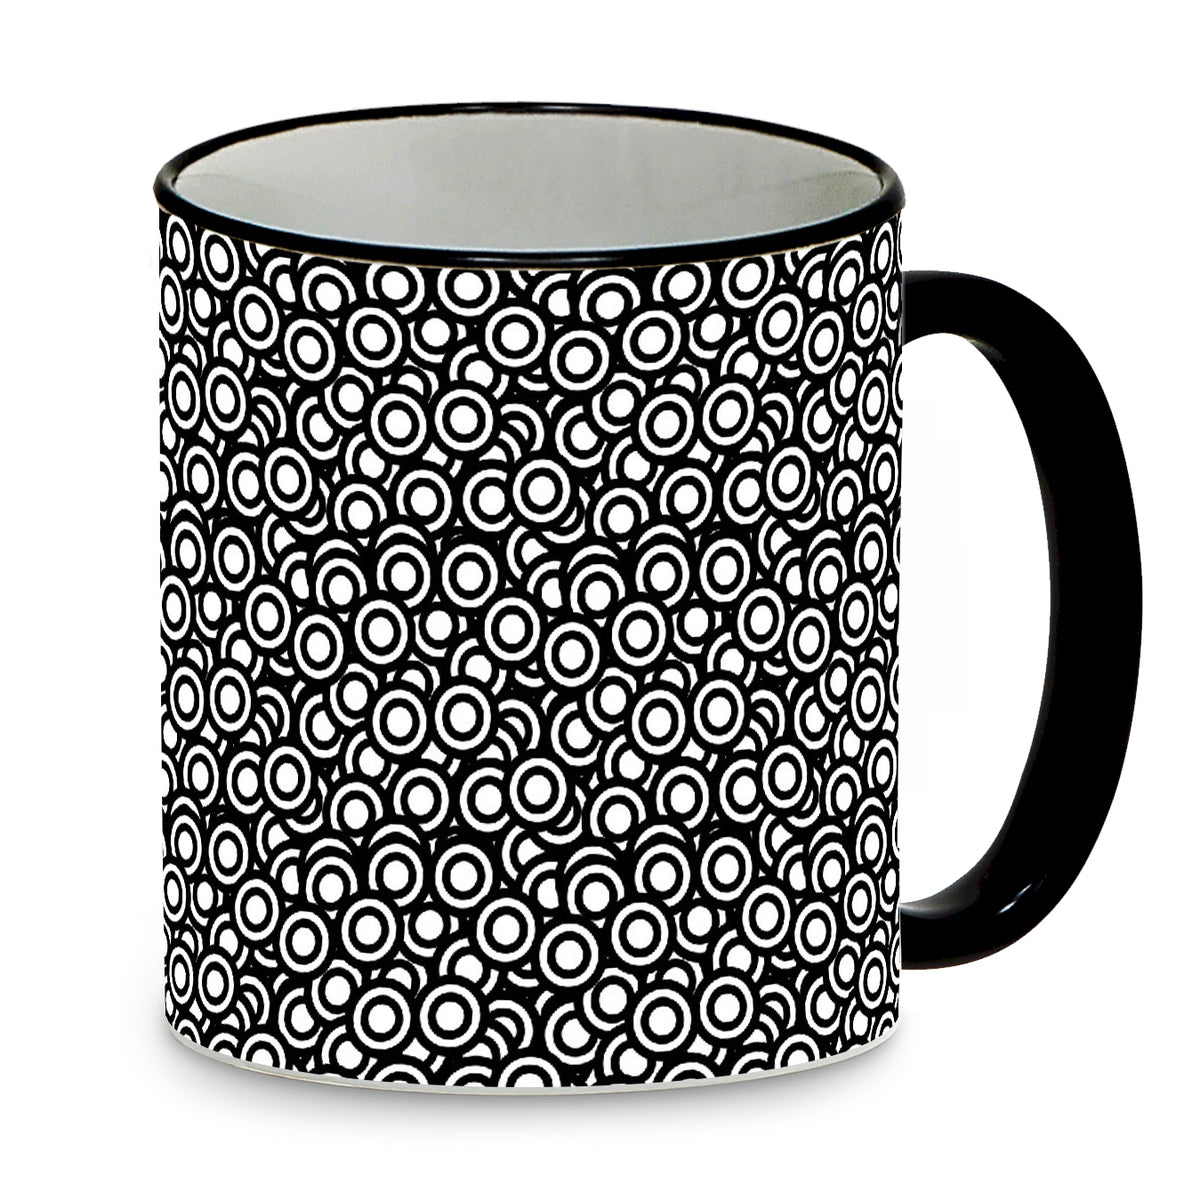 SUBLIMART: B&amp;W Beauty  - Mug featuring a dramatic circle design in black and white - Artistica.com